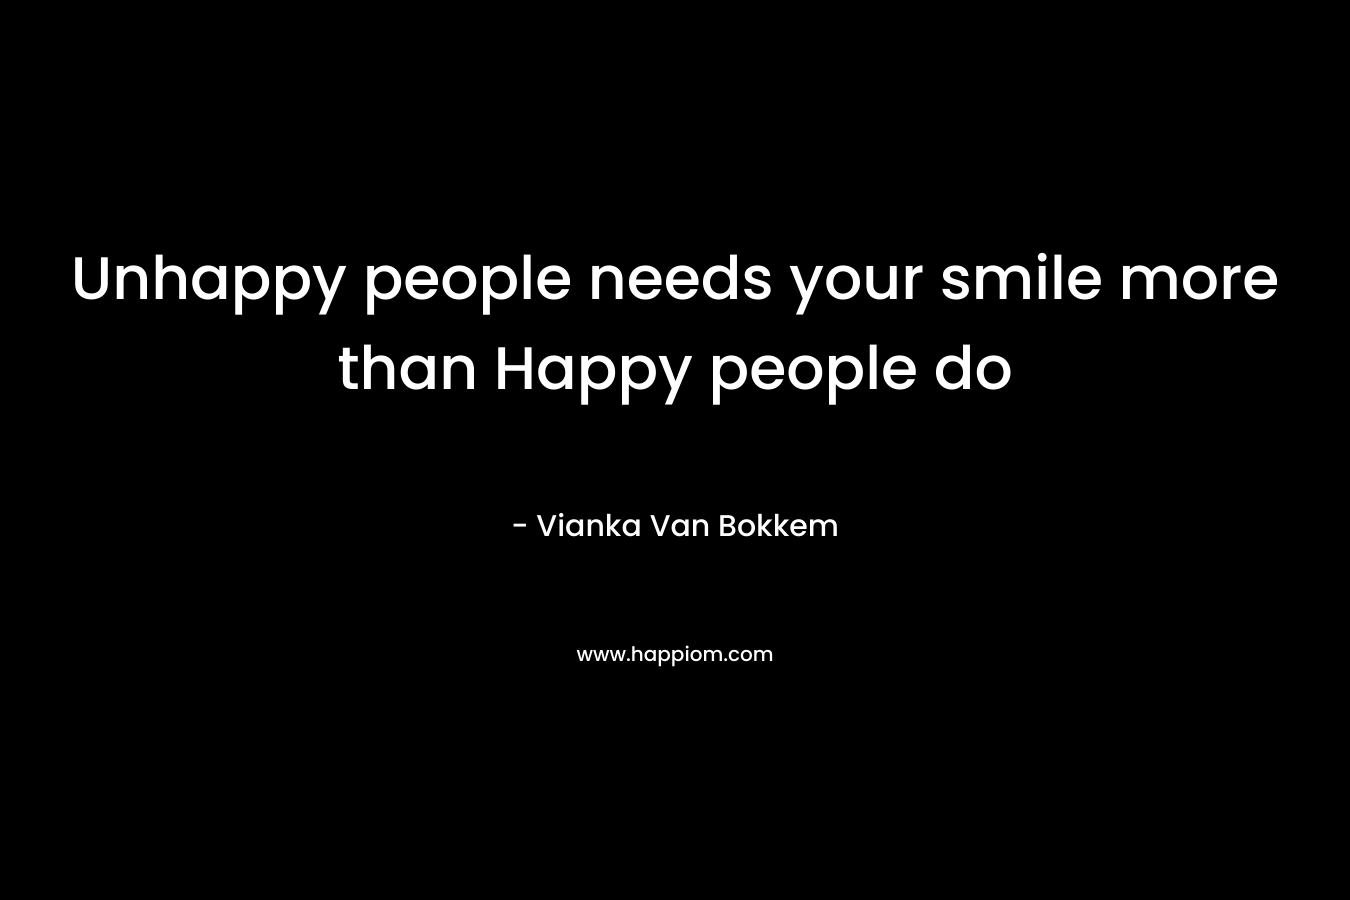 Unhappy people needs your smile more than Happy people do